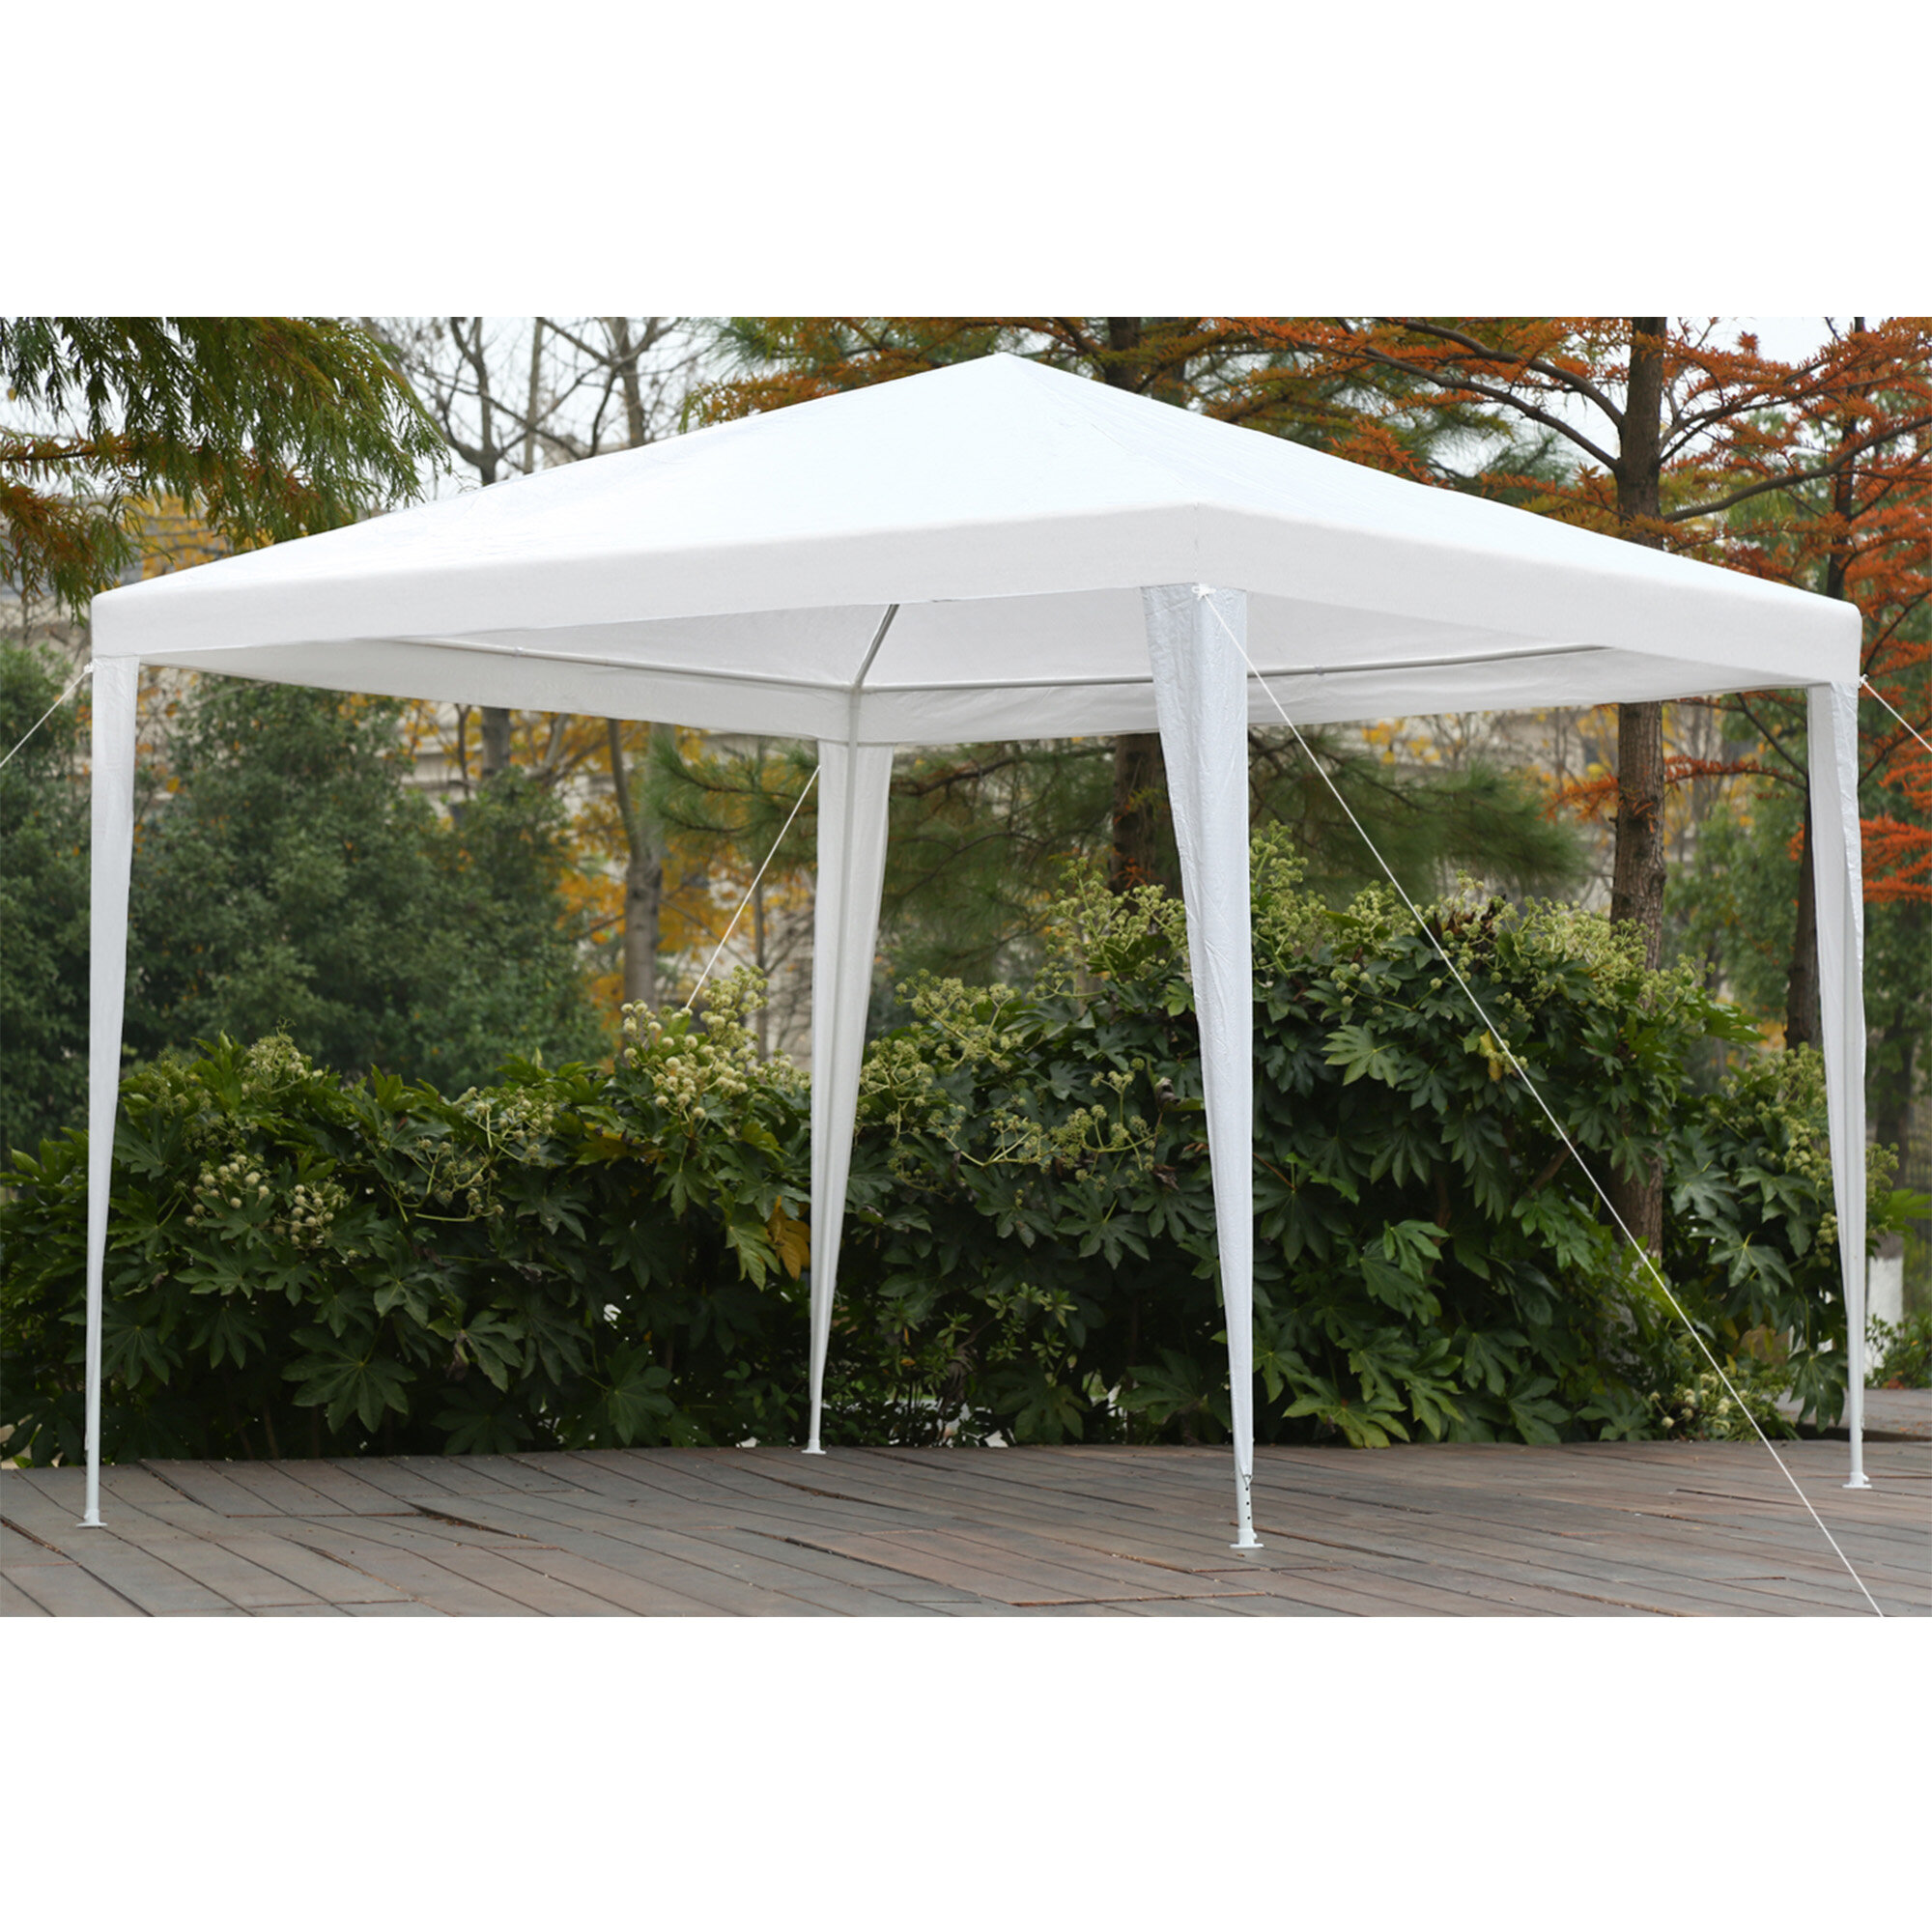 FDW 10' x 10' Outdoor Canopy Party Wedding Tent Garden Gazebo Pavilion  Cater Events & Reviews